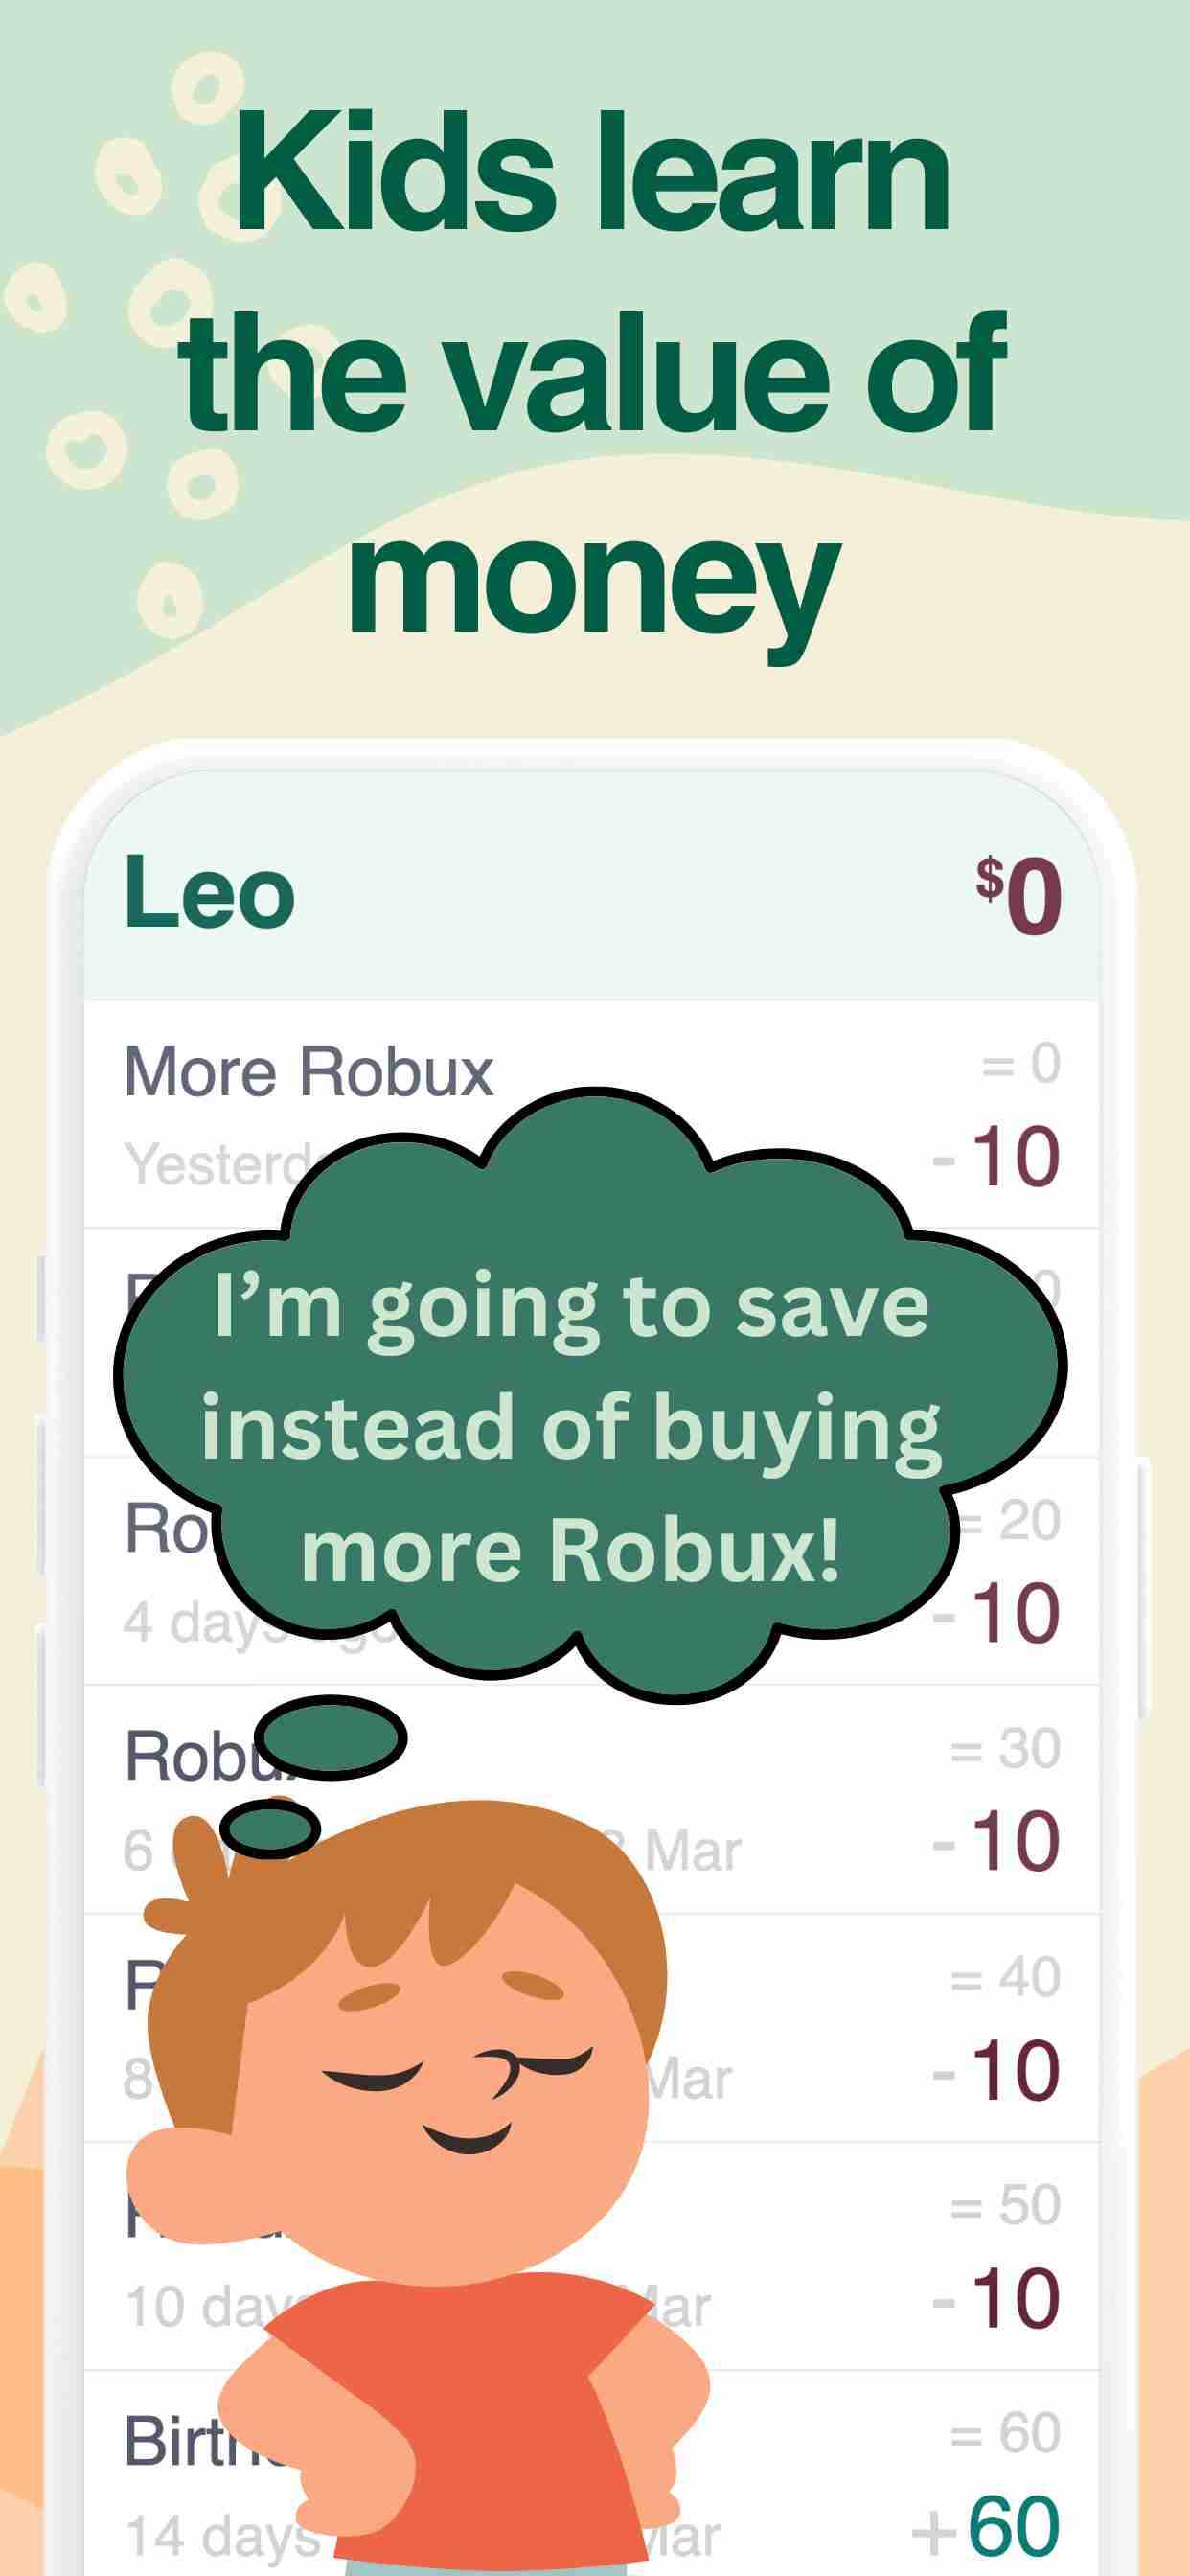 Kids learn the value of money; I’m going to save instead of buying more Robux!